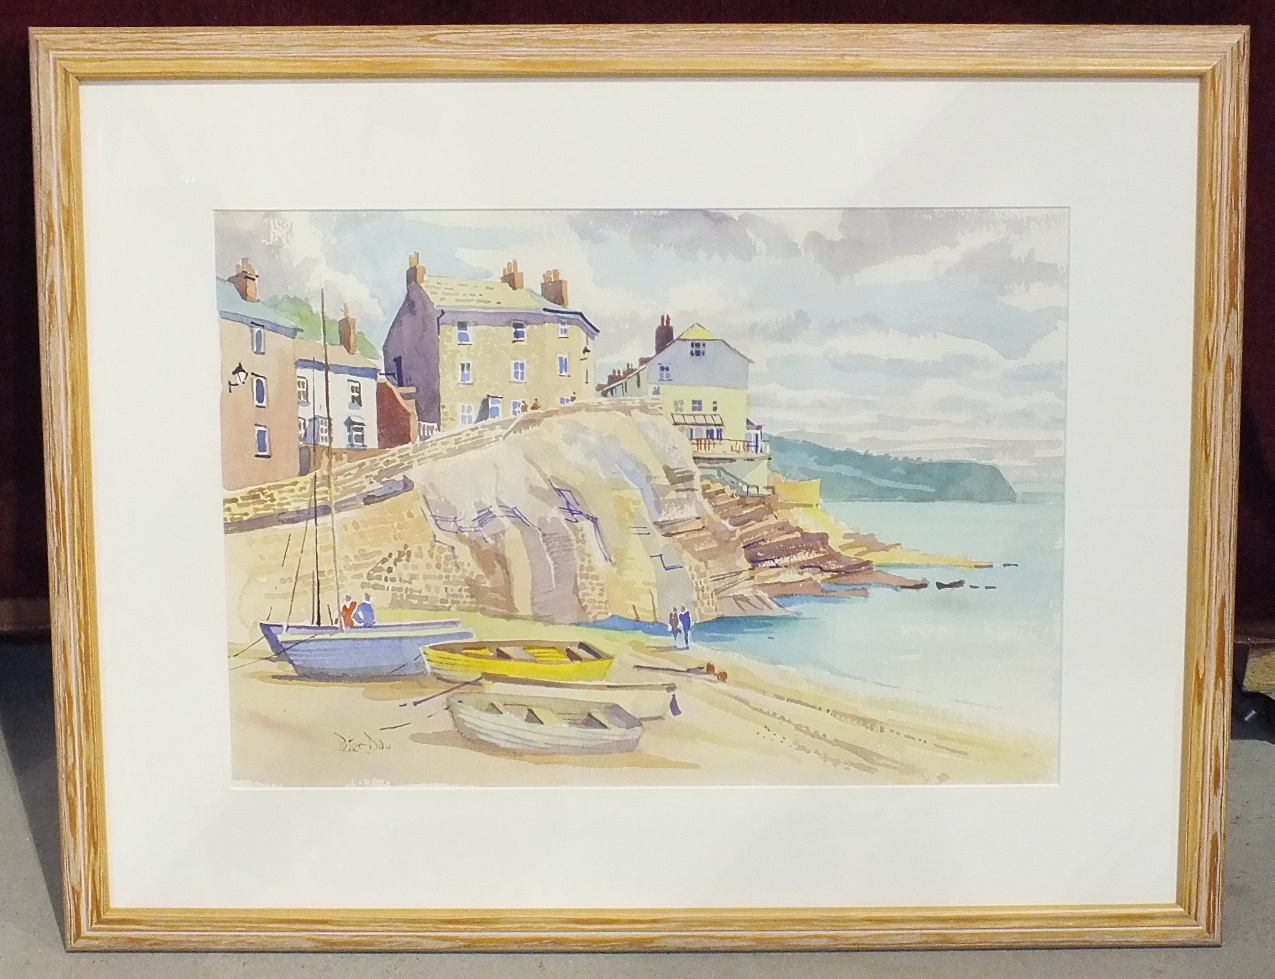 J Bailey, 'April afternoon at Kingsand', signed watercolour, dated '99, 19 x 37cm, Barbican - Image 2 of 3